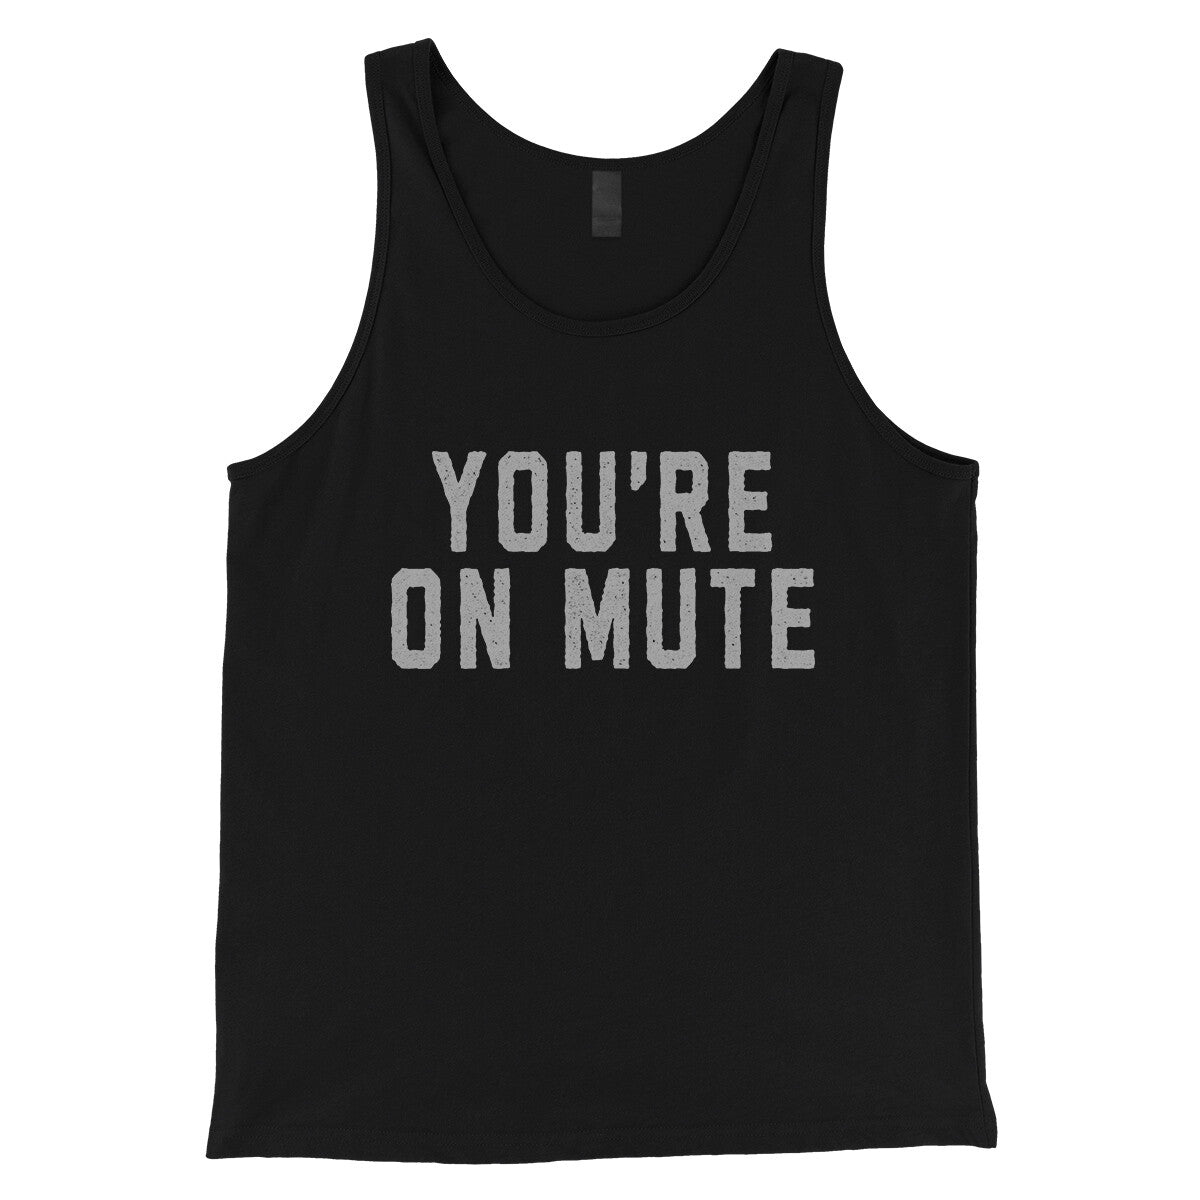 You're on Mute in Black Color